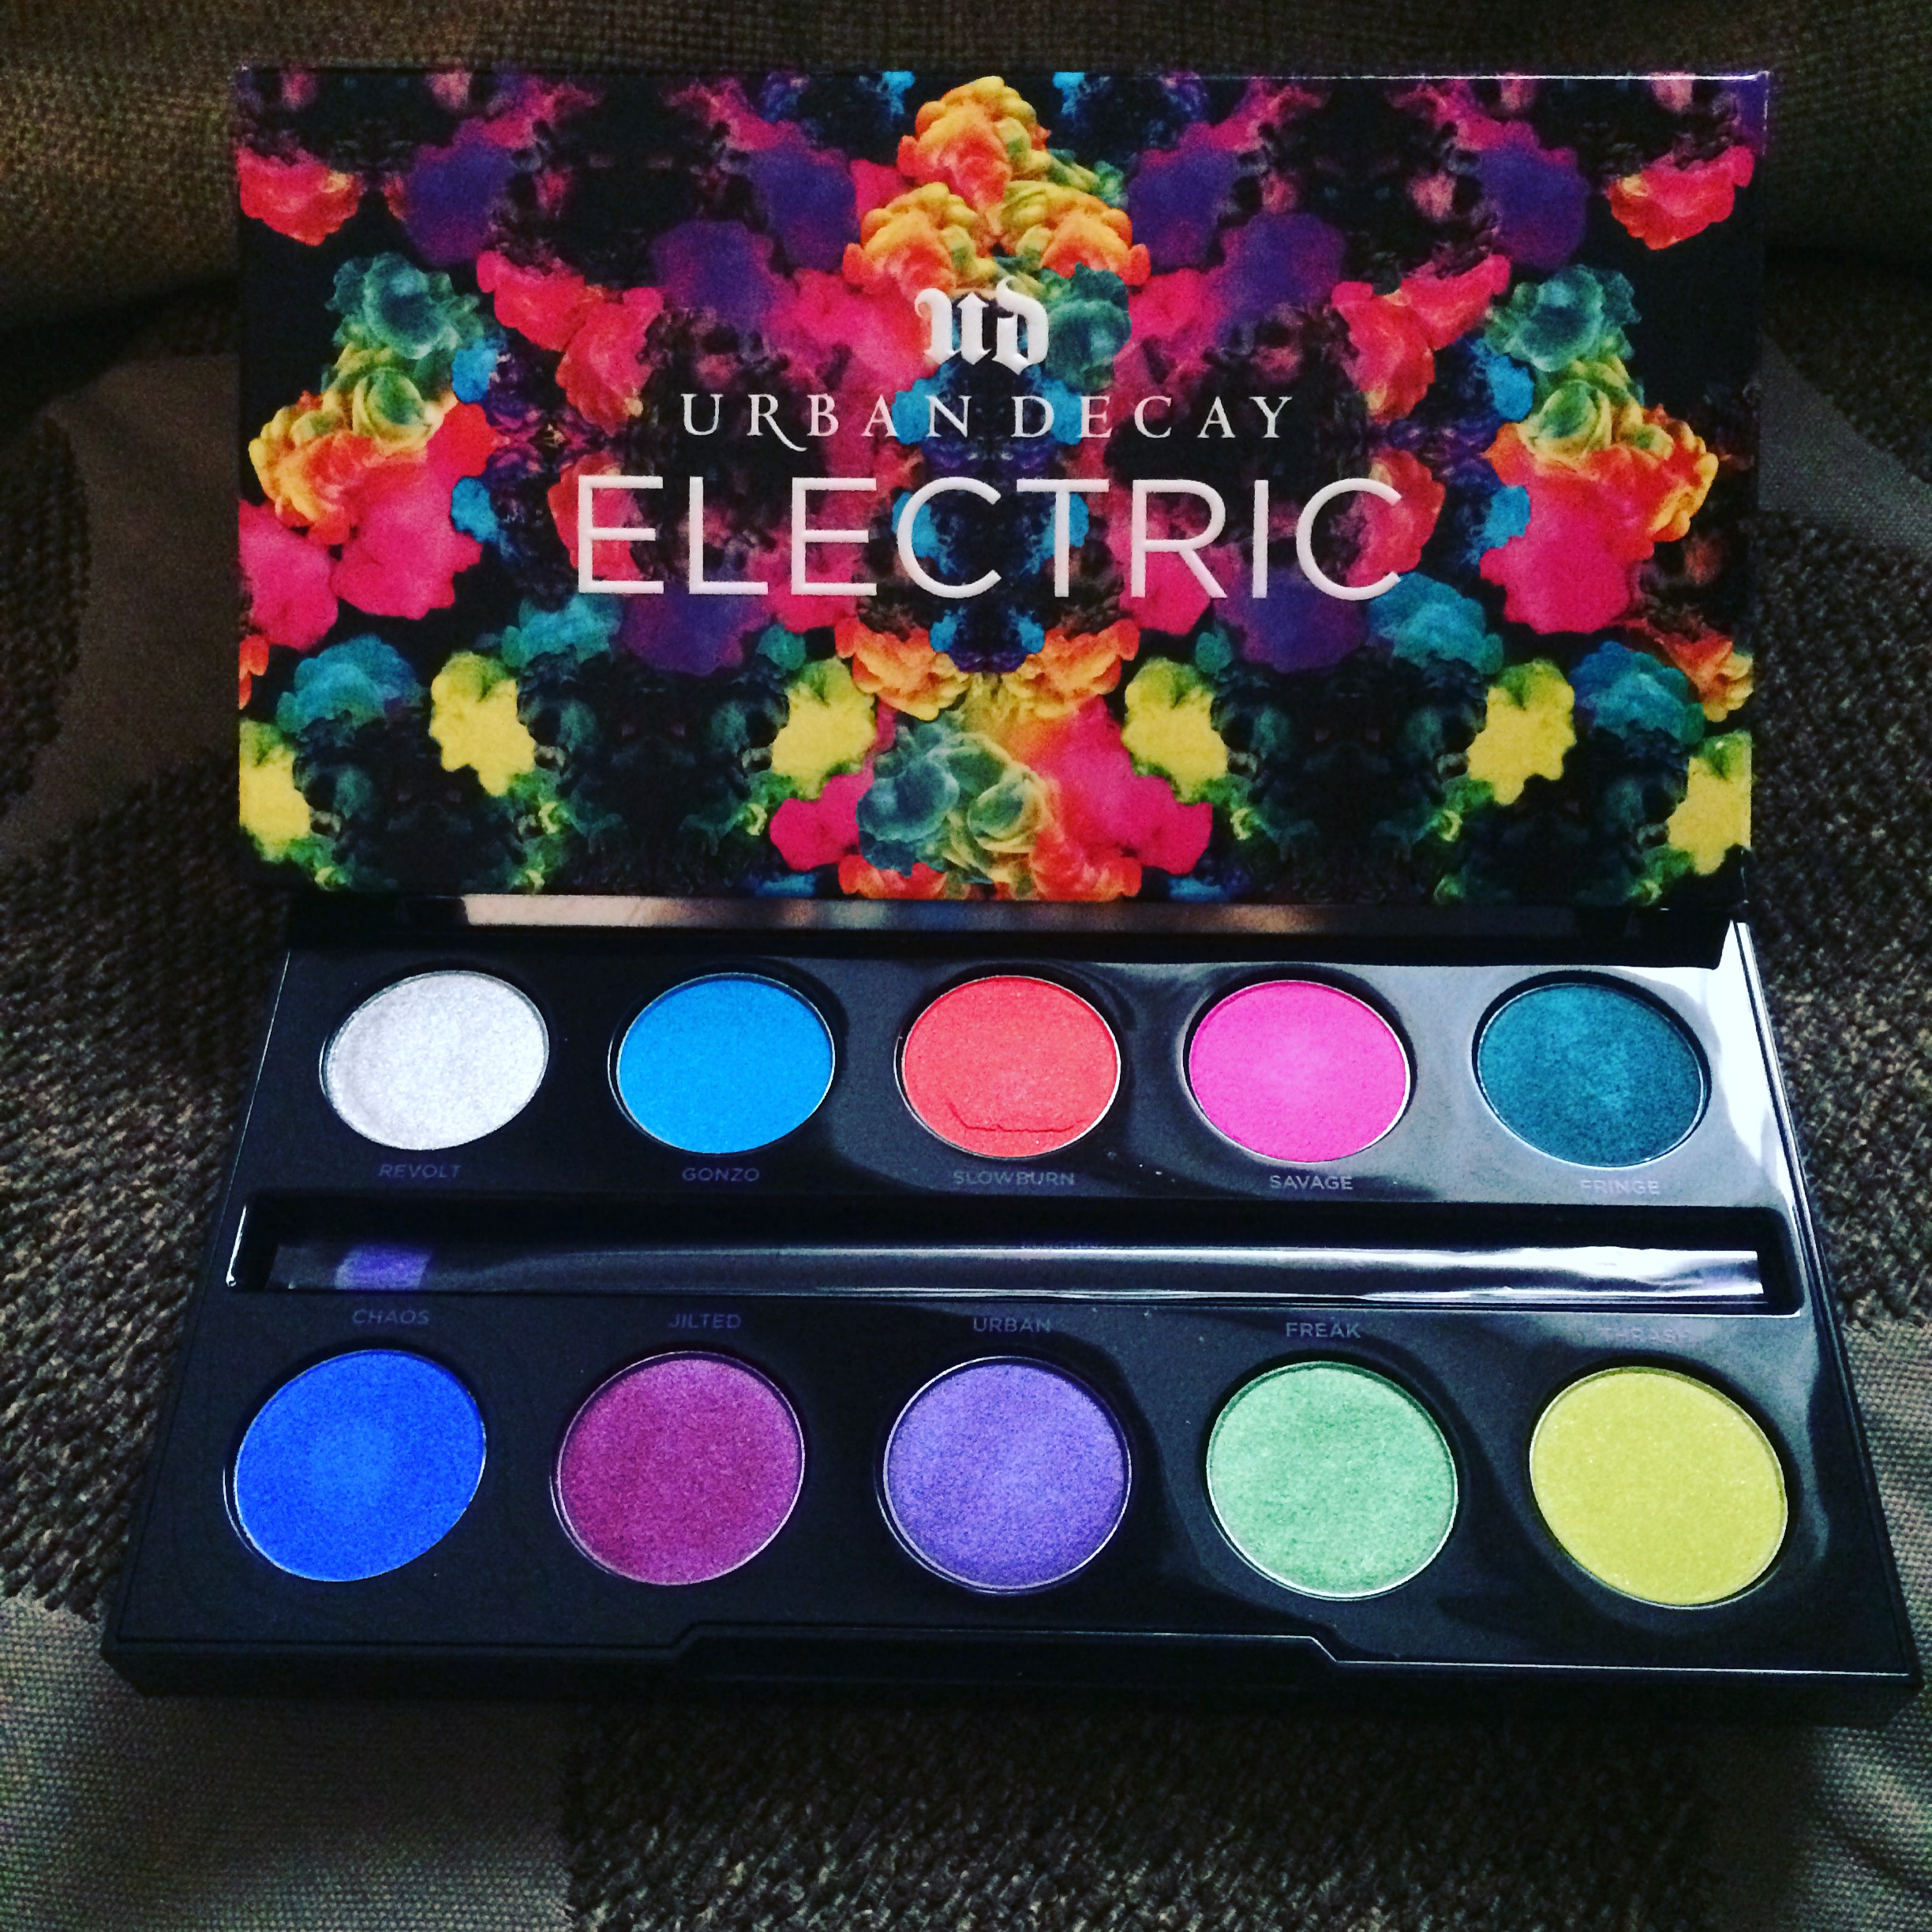 Electric Palette by Urban Decay.